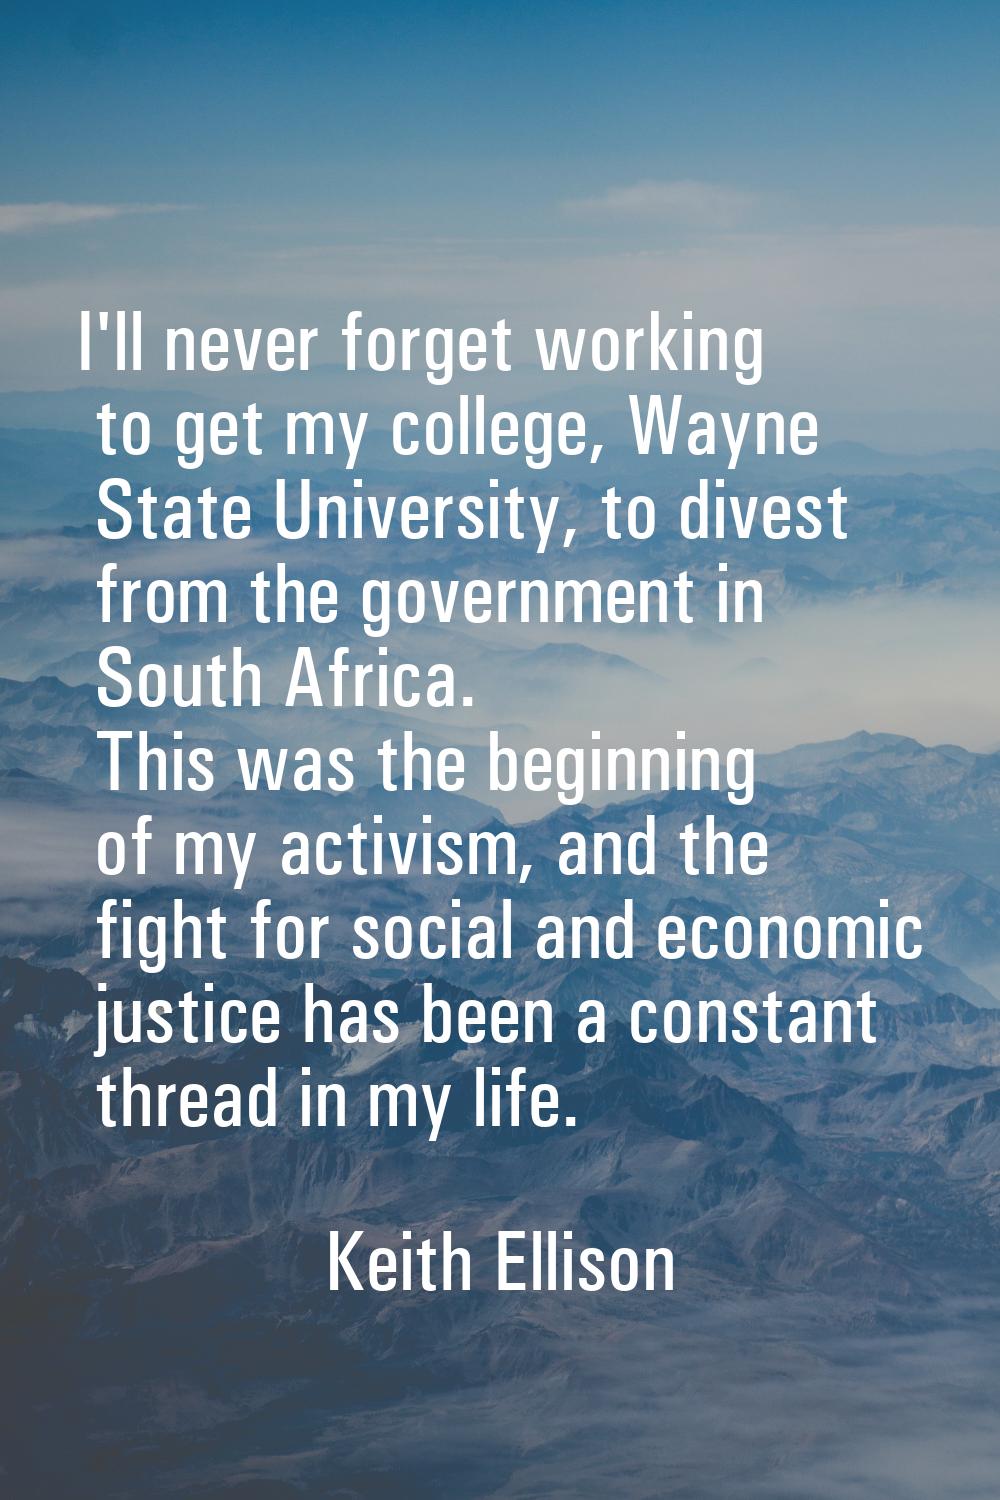 I'll never forget working to get my college, Wayne State University, to divest from the government 